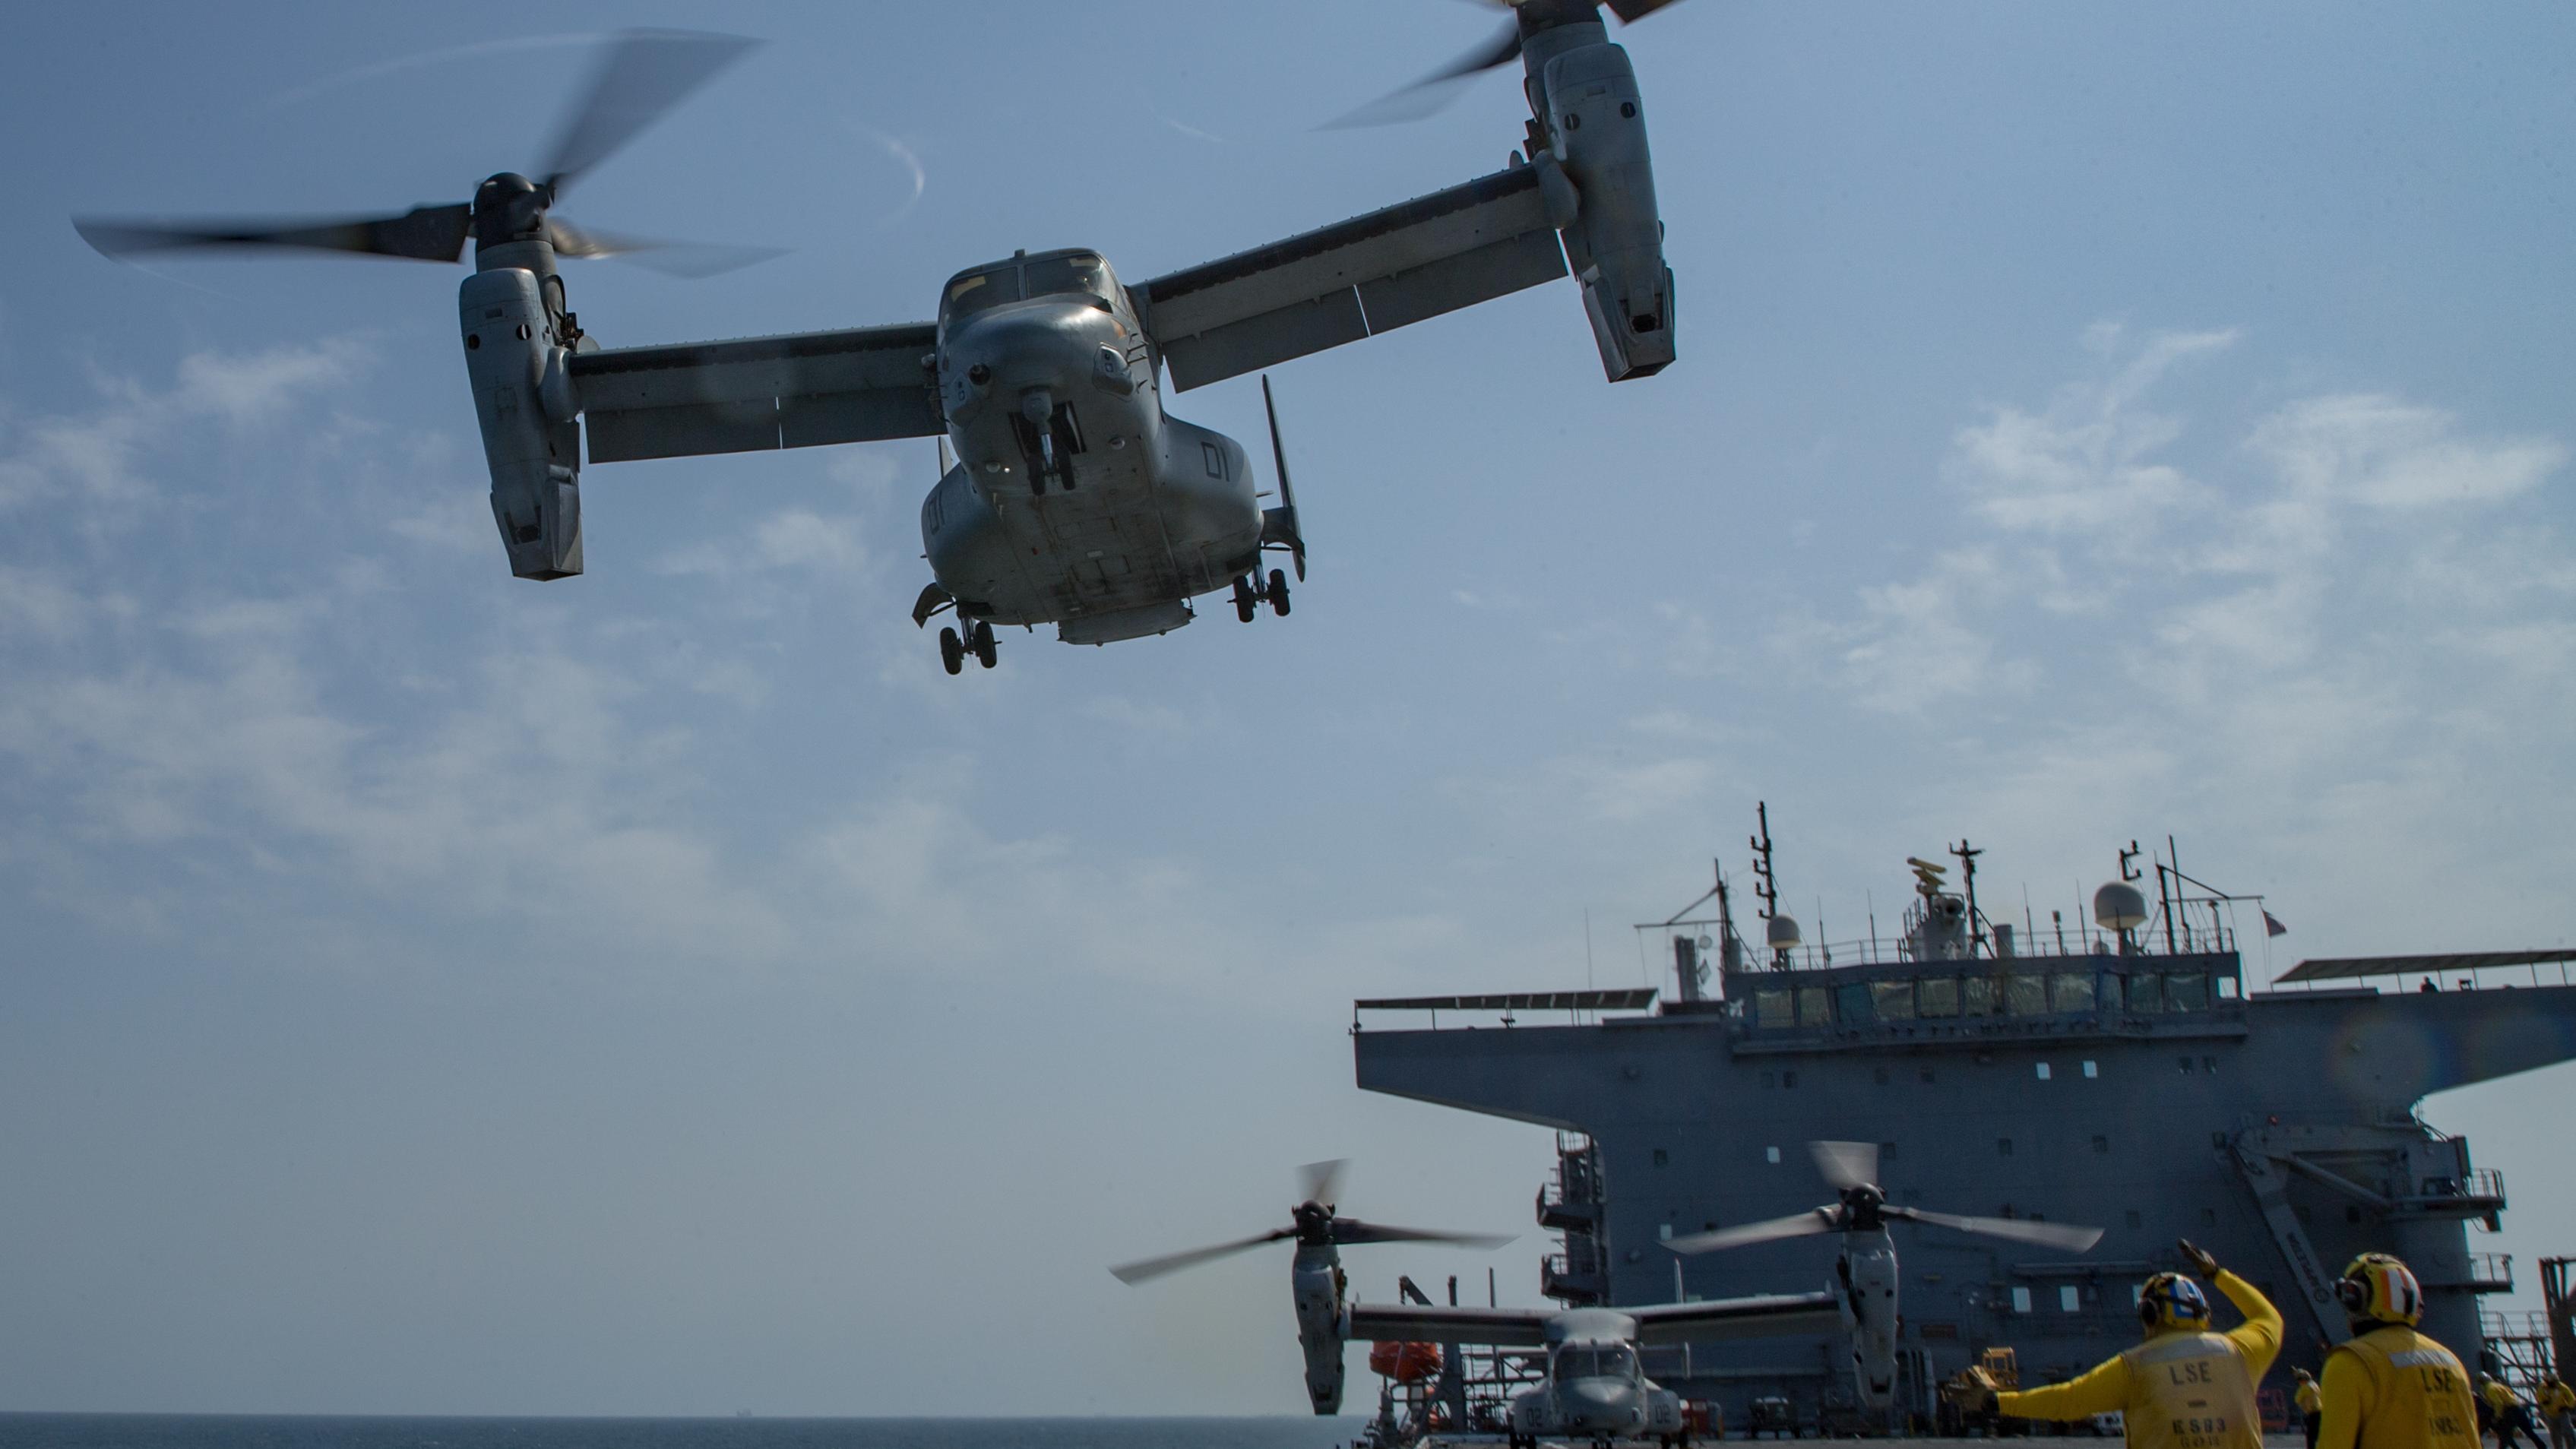 MV-22 Osprey takes off from the flight deck of expeditionary sea base USS Lewis B. Puller